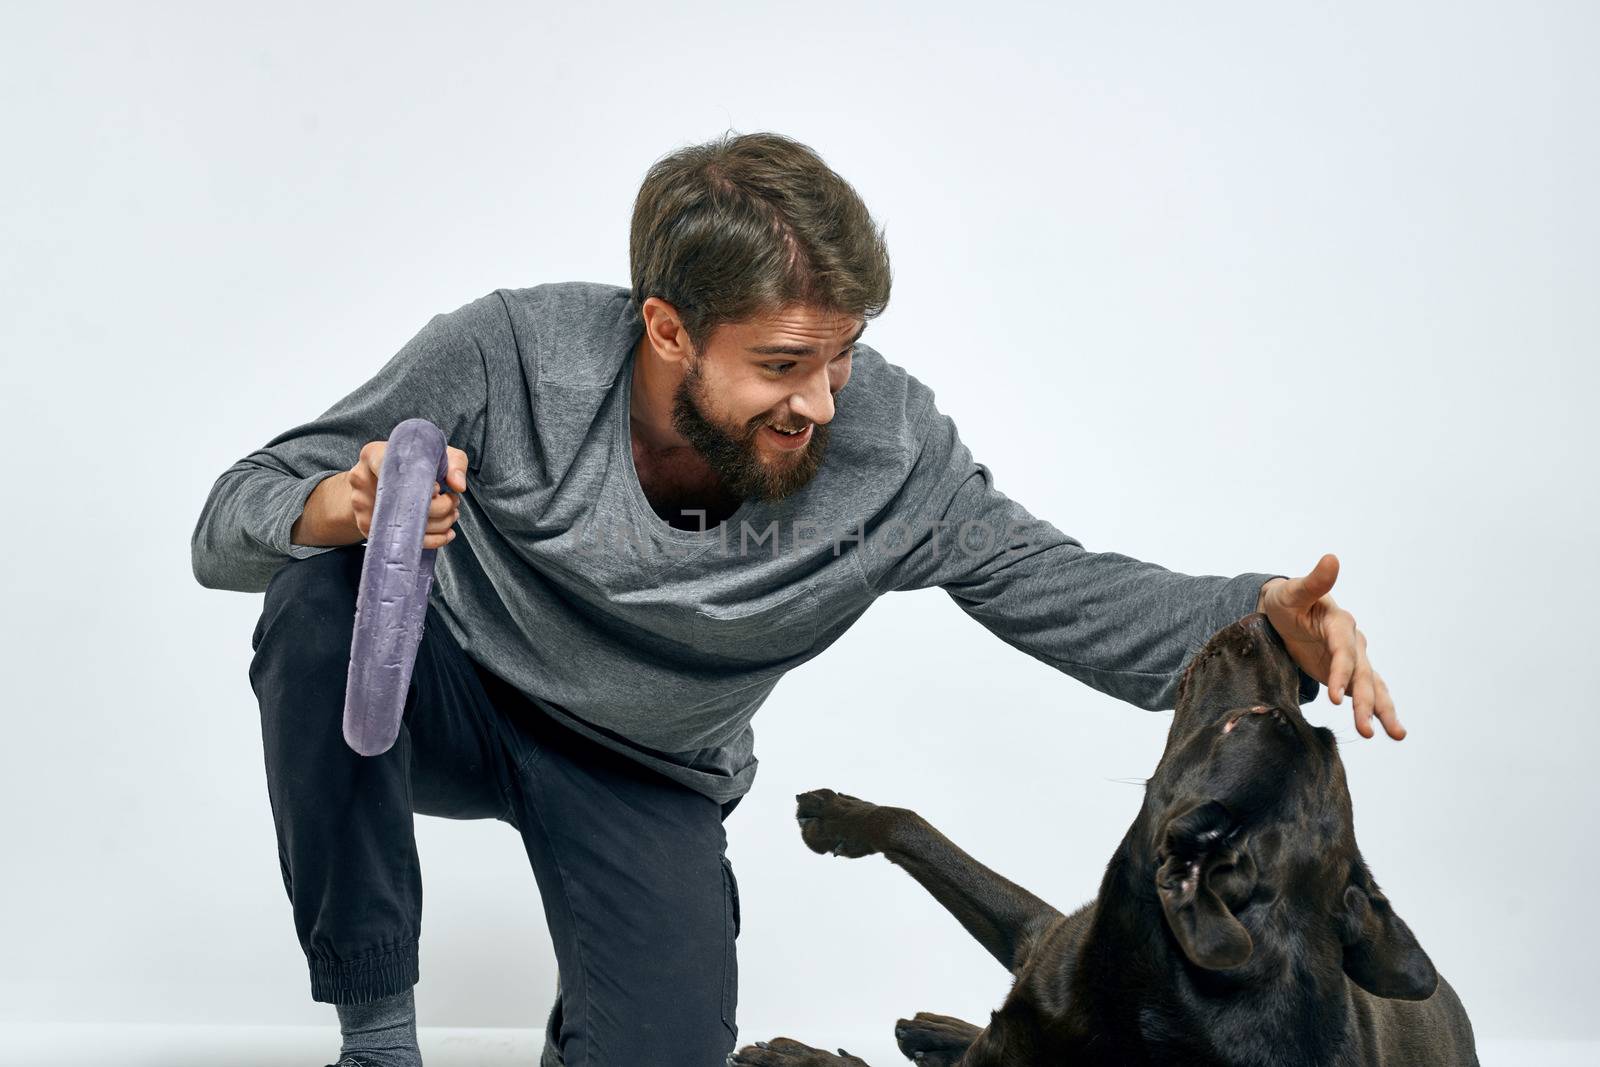 Man with dog training gray ring doing exercises pets light background. High quality photo